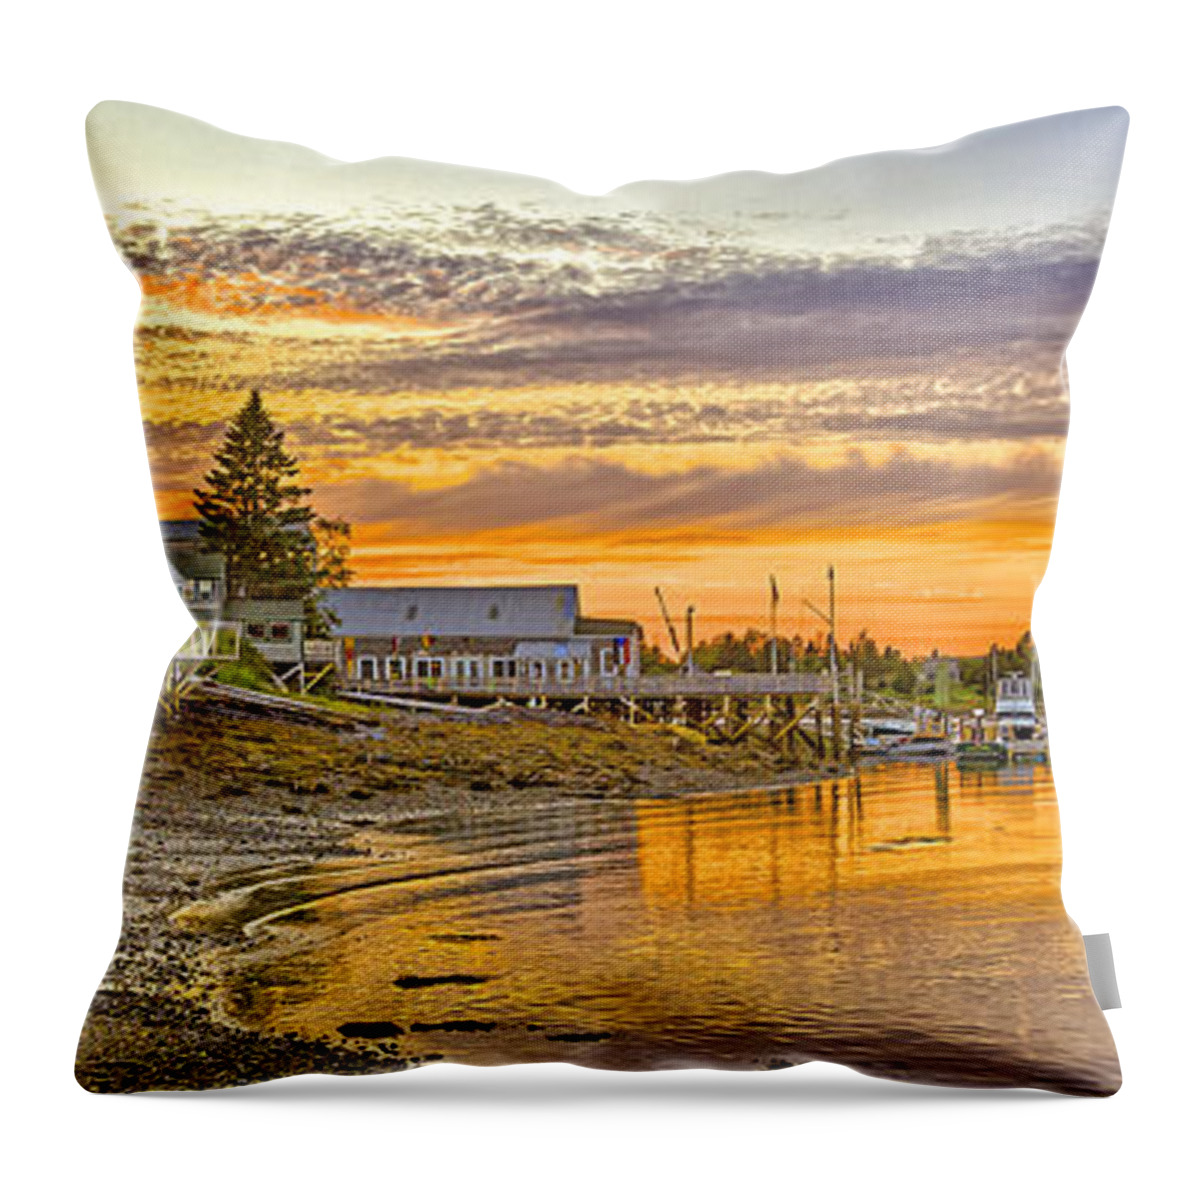 Sunset Throw Pillow featuring the photograph Bass Harbor Maine Lowtide Sunset by Fred J Lord